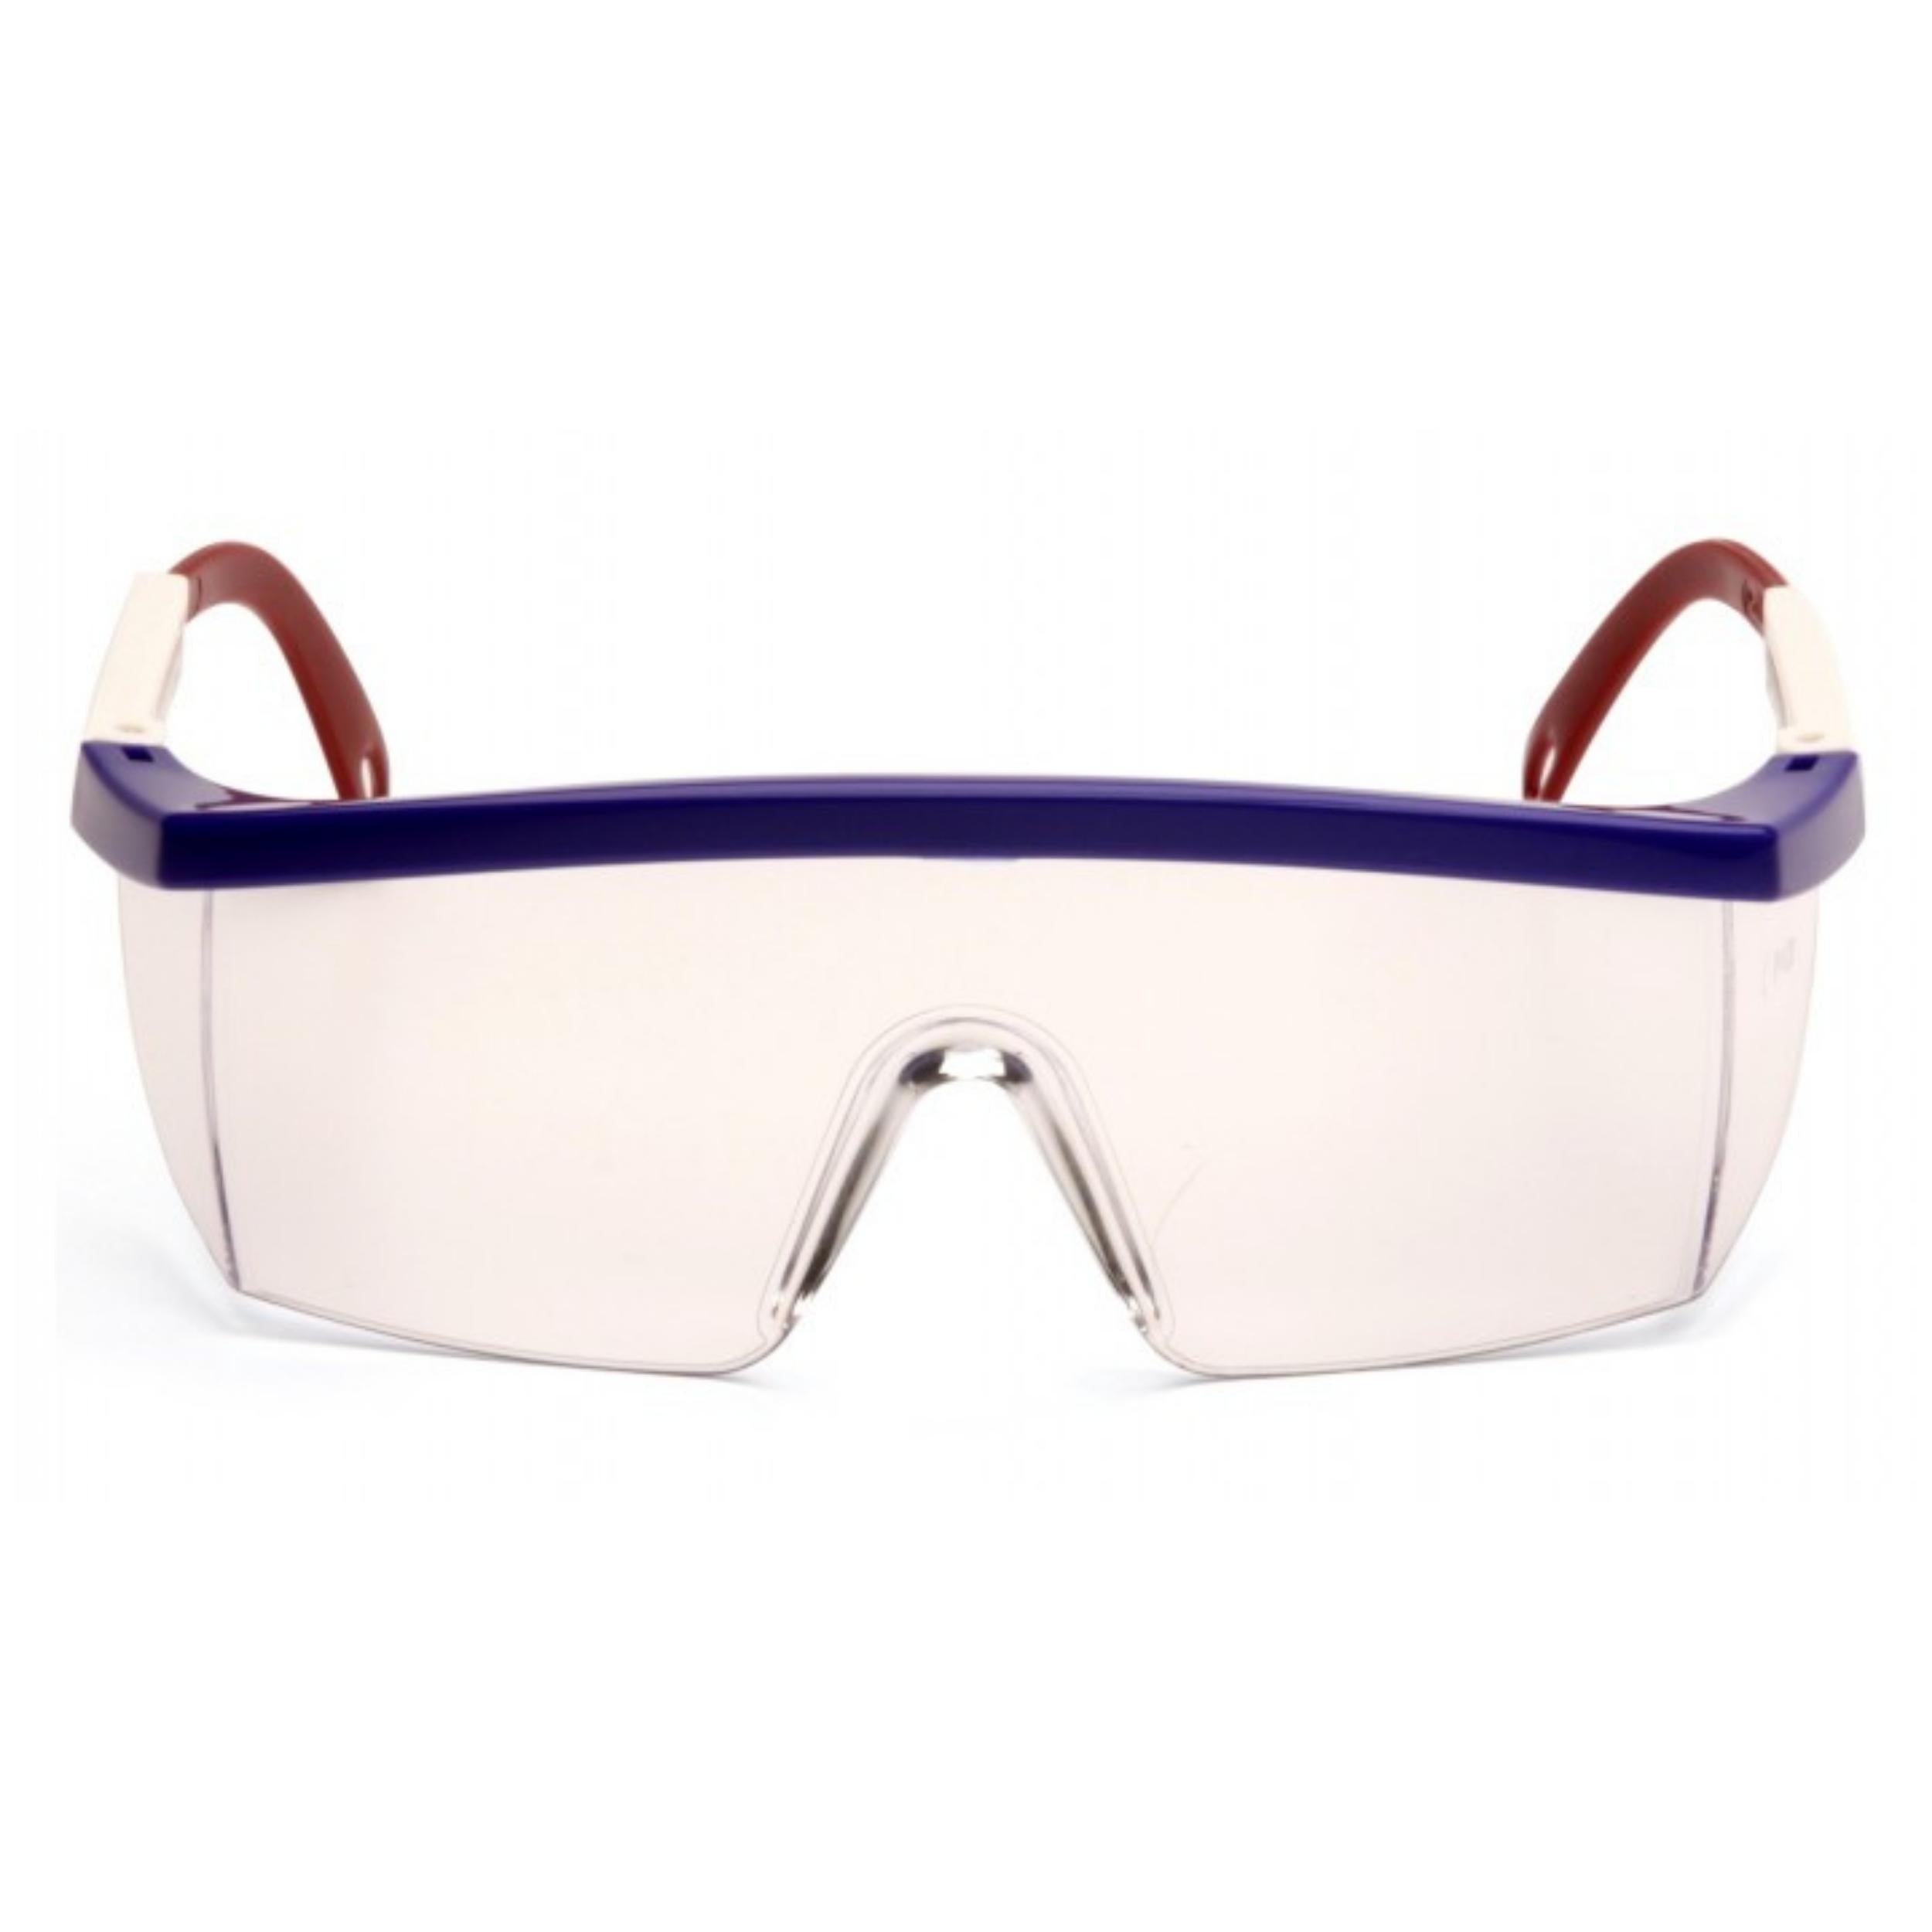 PYRAMEX-SNWR410S Clear Lens with Red, White, and Blue Frame